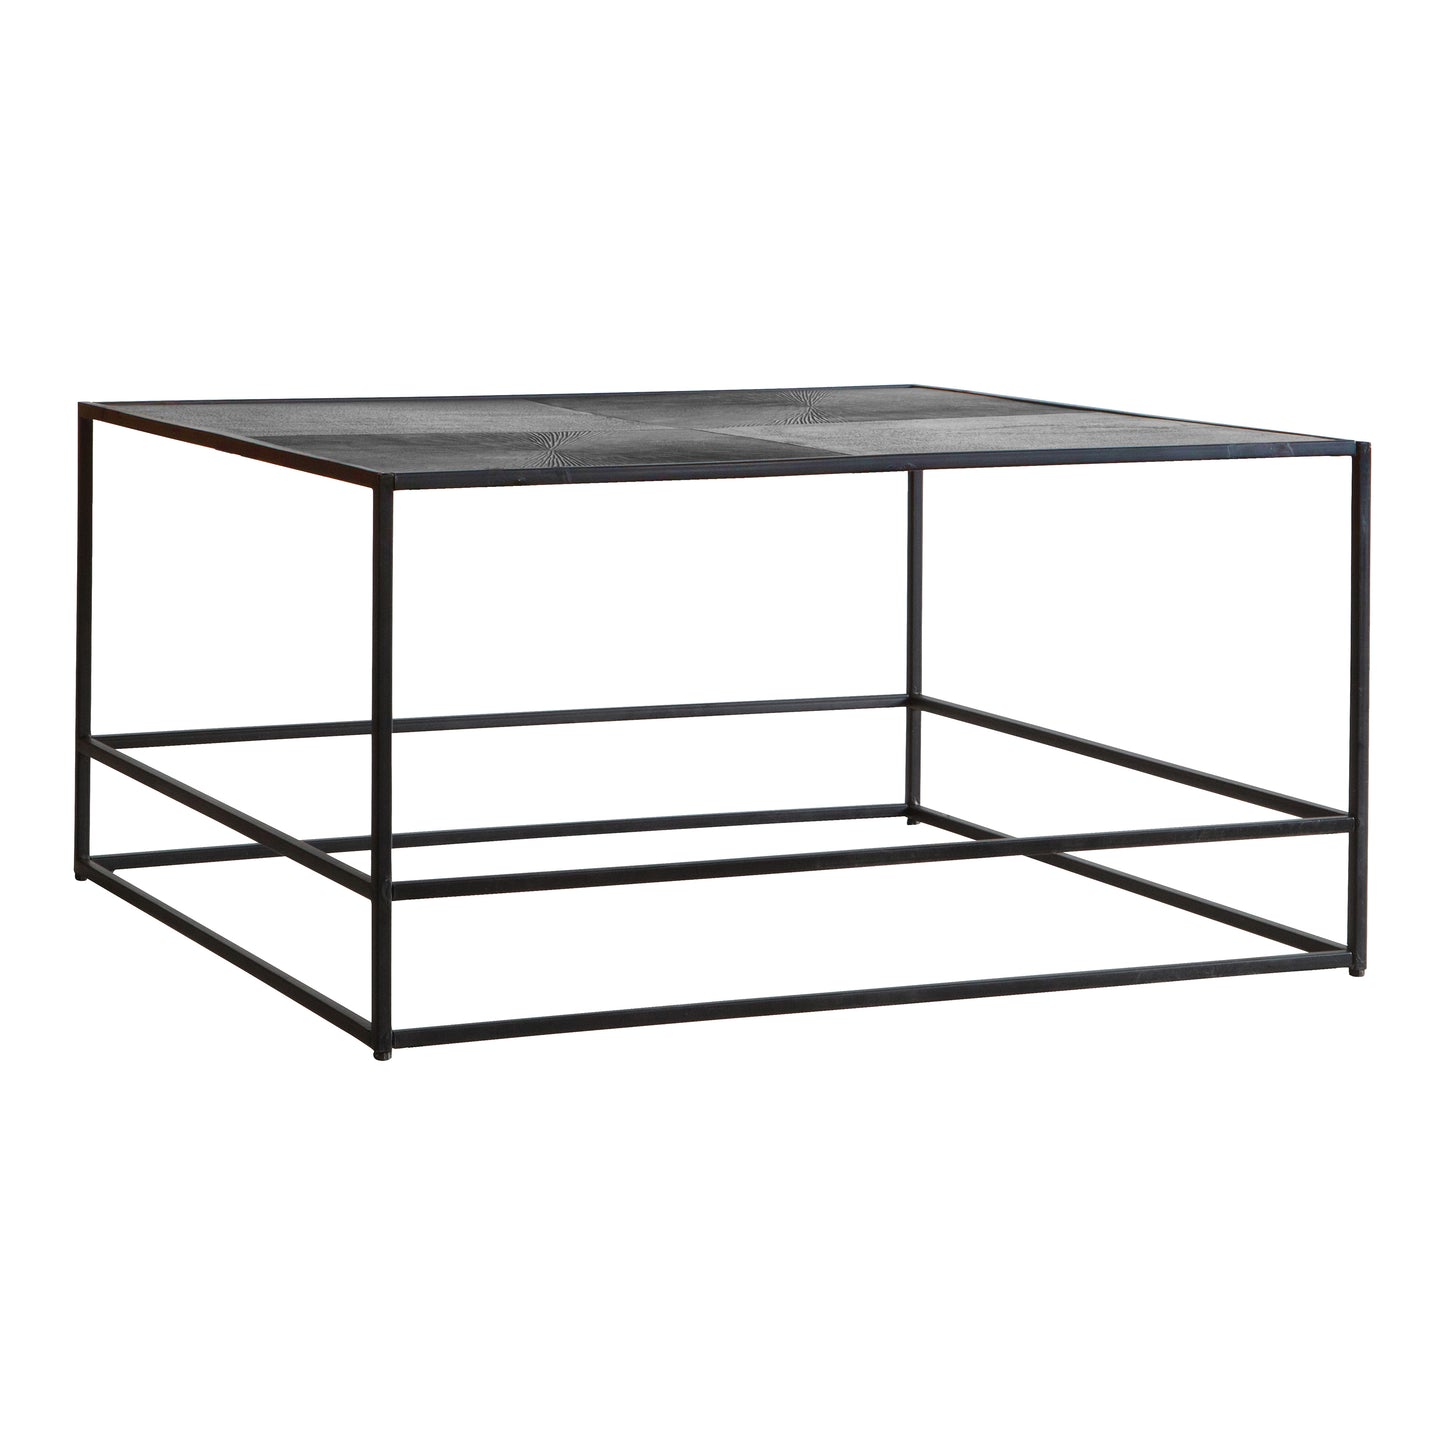 A Bigbury Coffee Table Antique Silver 800x800x410mm by Kikiathome.co.uk for home interior decor.